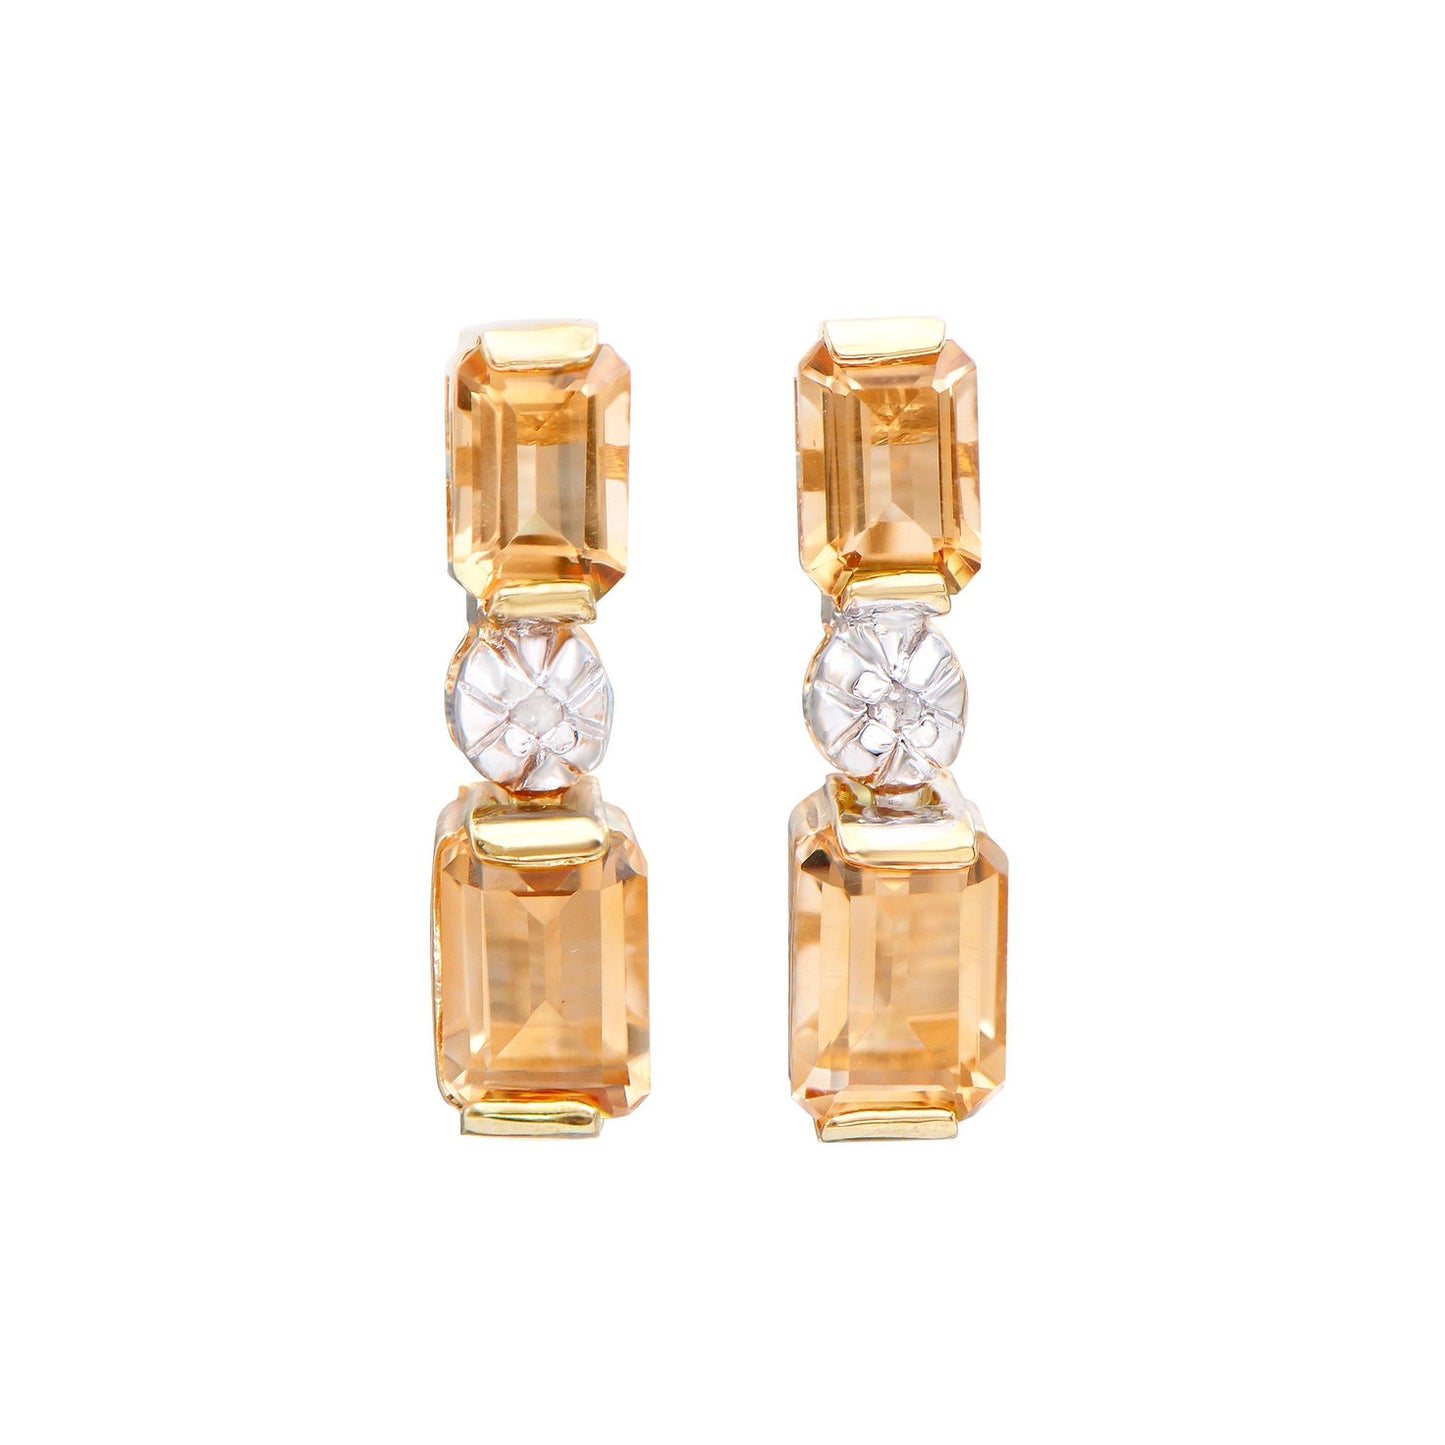 Plated 18KT Yellow Gold 3.02cts Citrine and Diamond Earrings